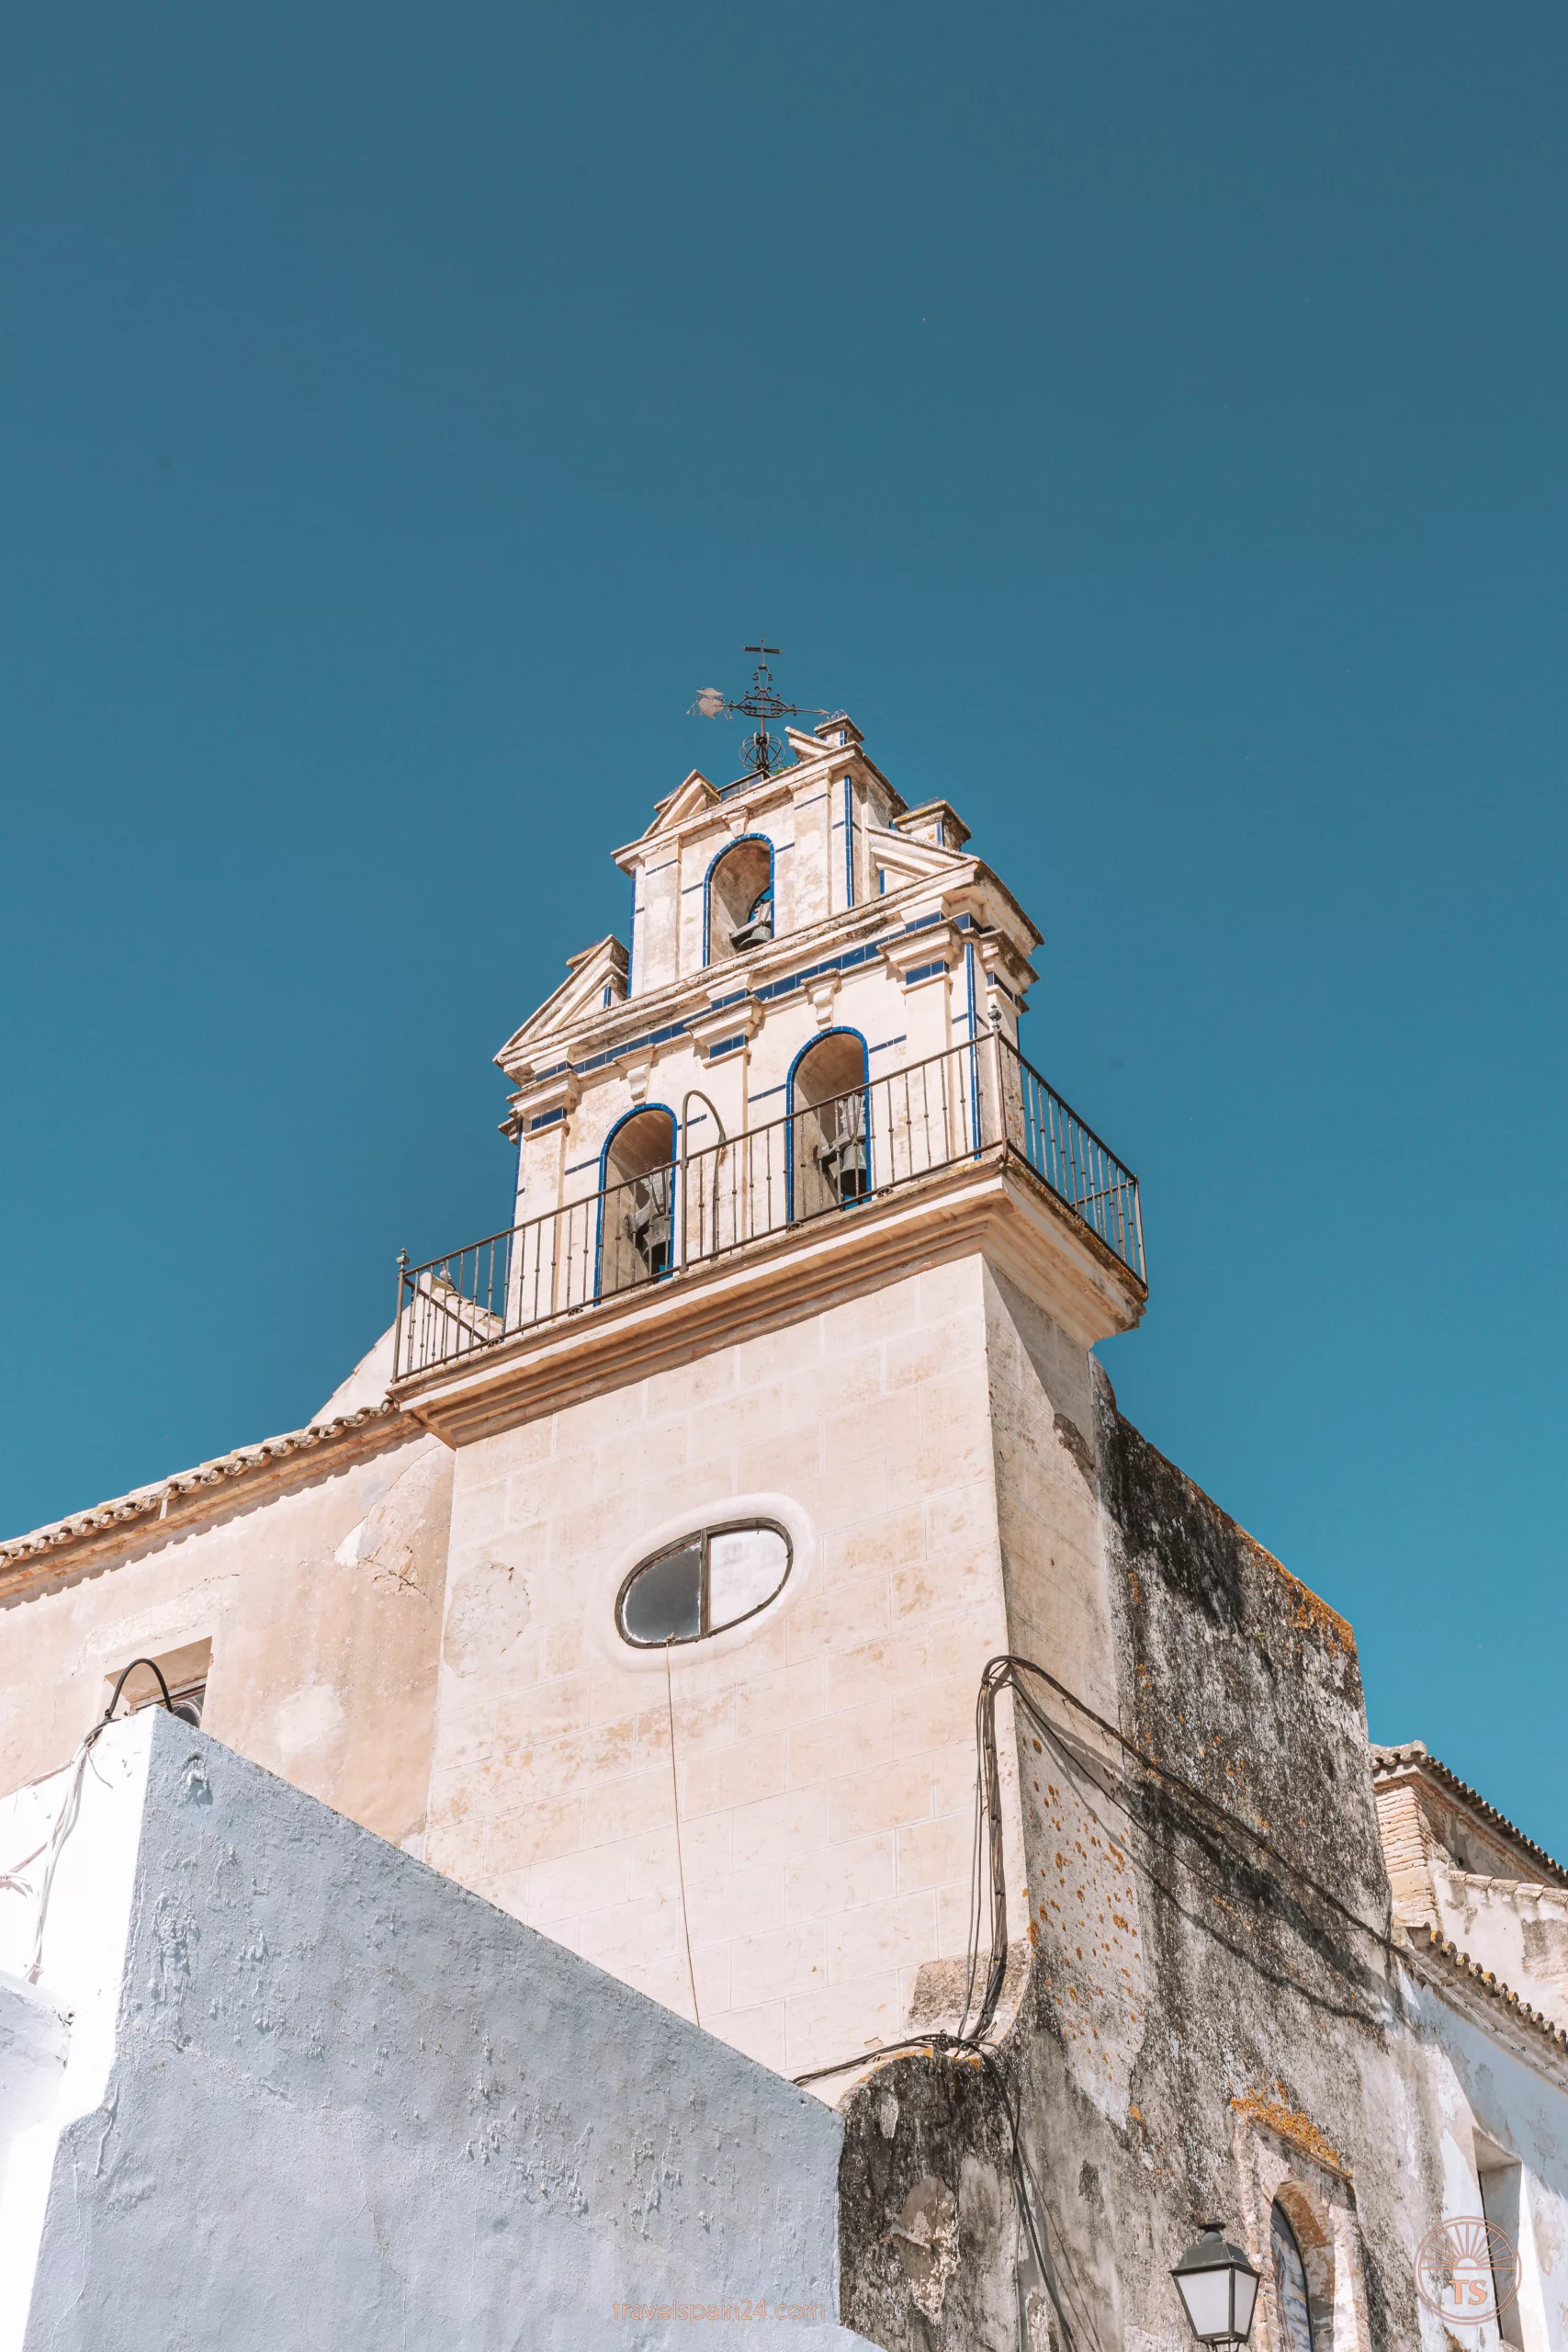 The tower of Iglesia de San Agustín in Arcos de la Frontera, set against a clear blue sky. The tower has three bells and a cross at the top.